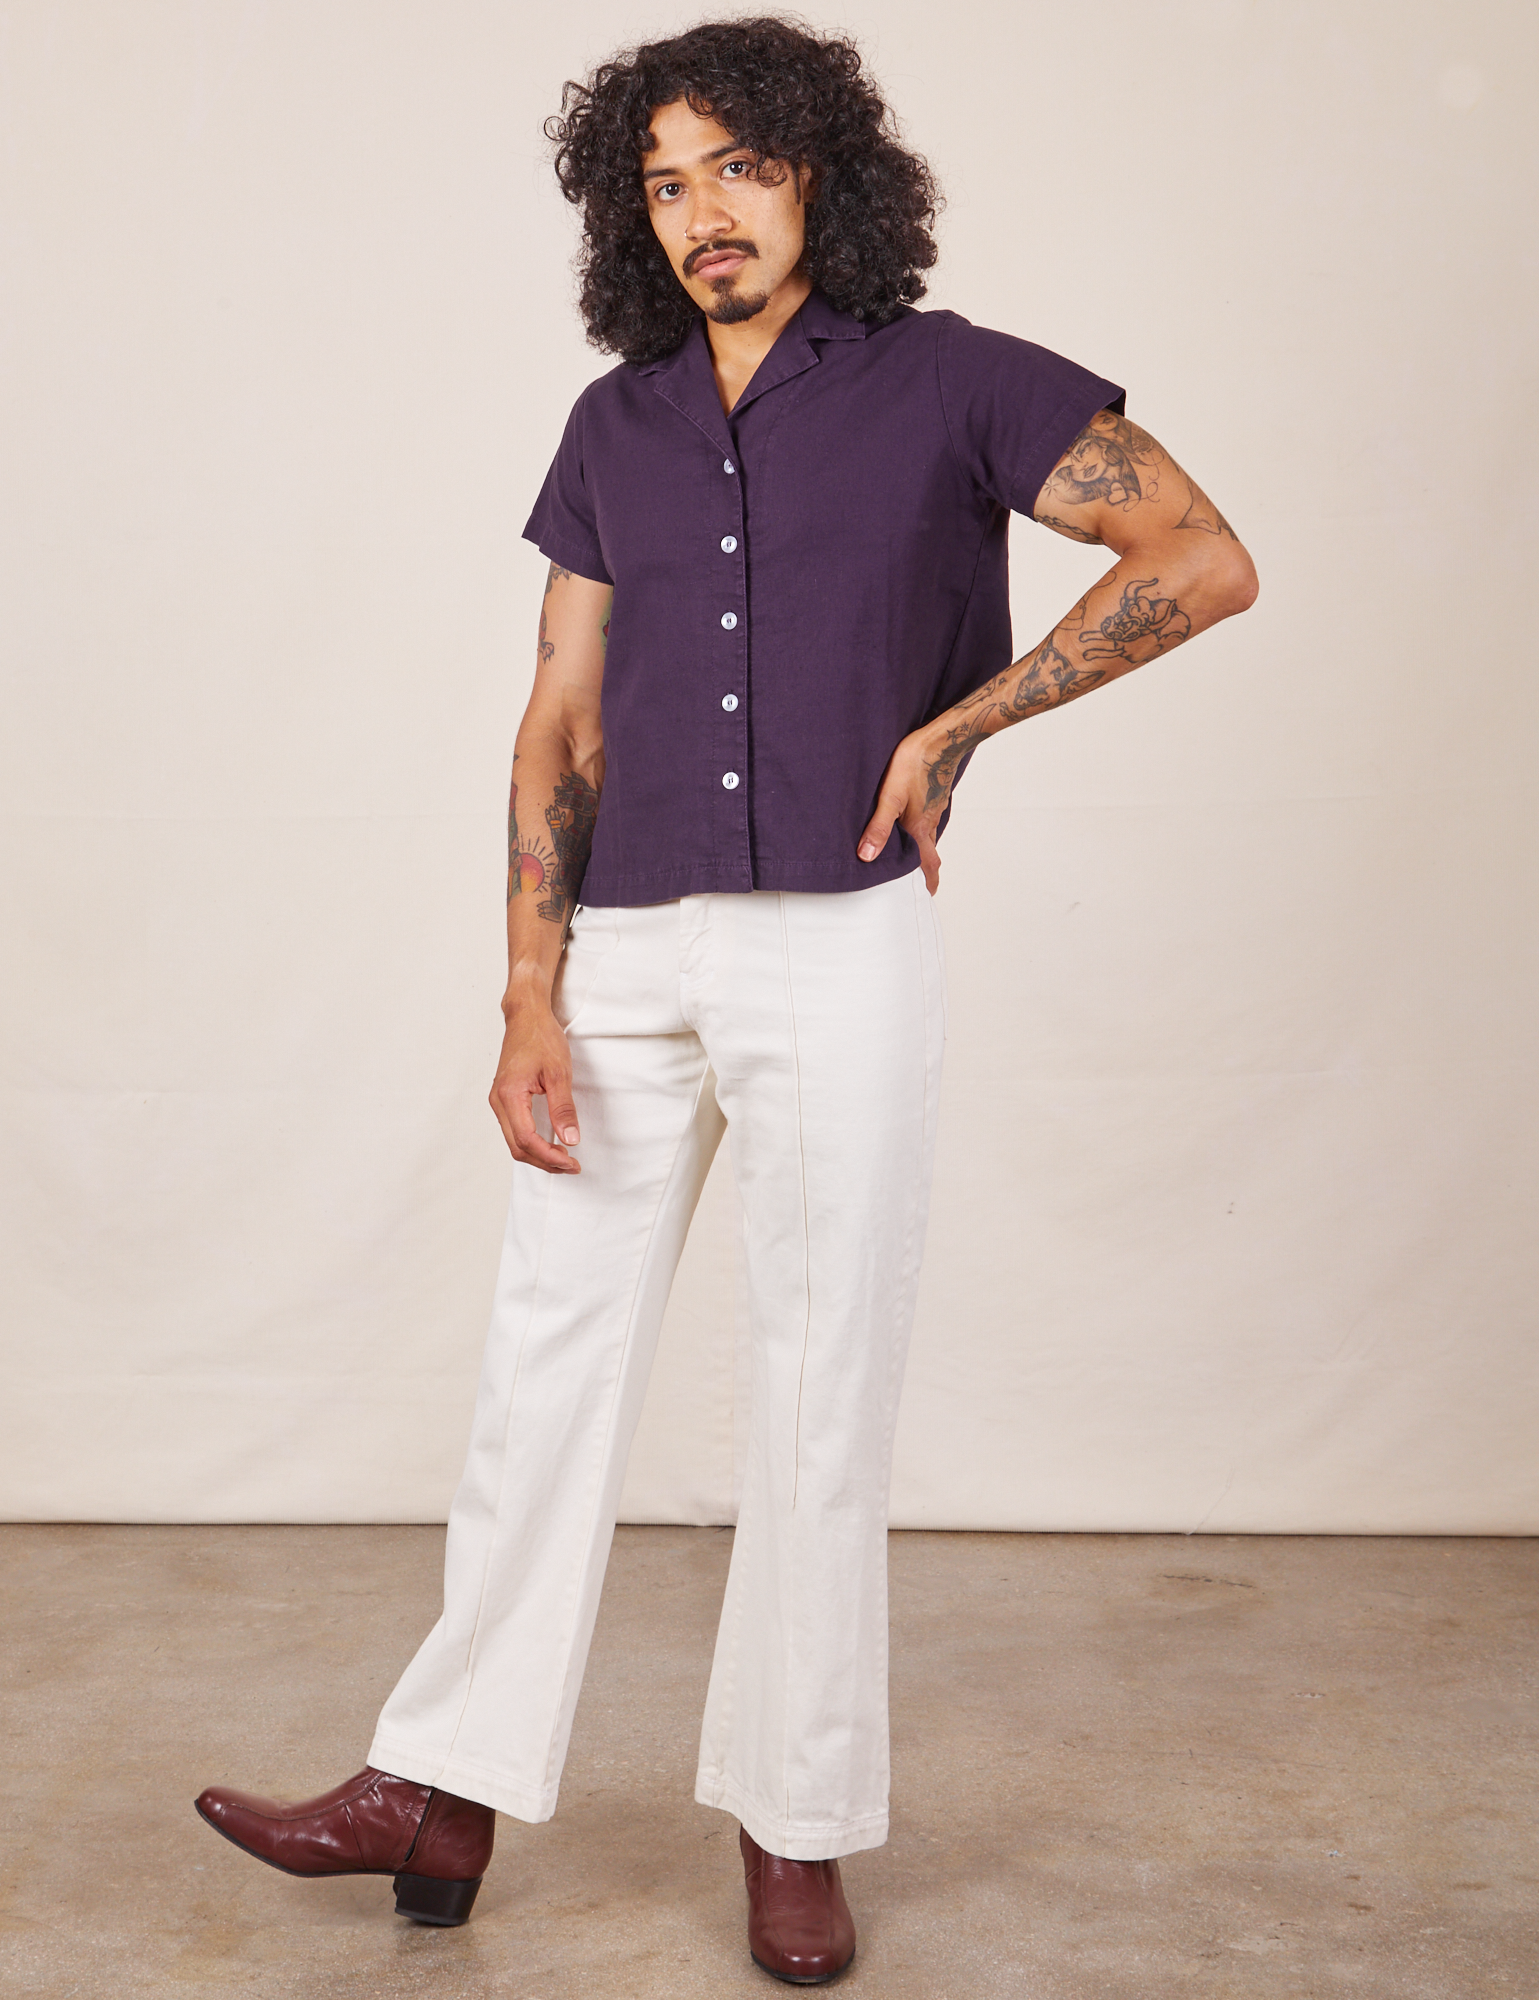 Jesse is wearing Pantry Button-Up in Nebula Purple and vintage tee off-white Western Pants